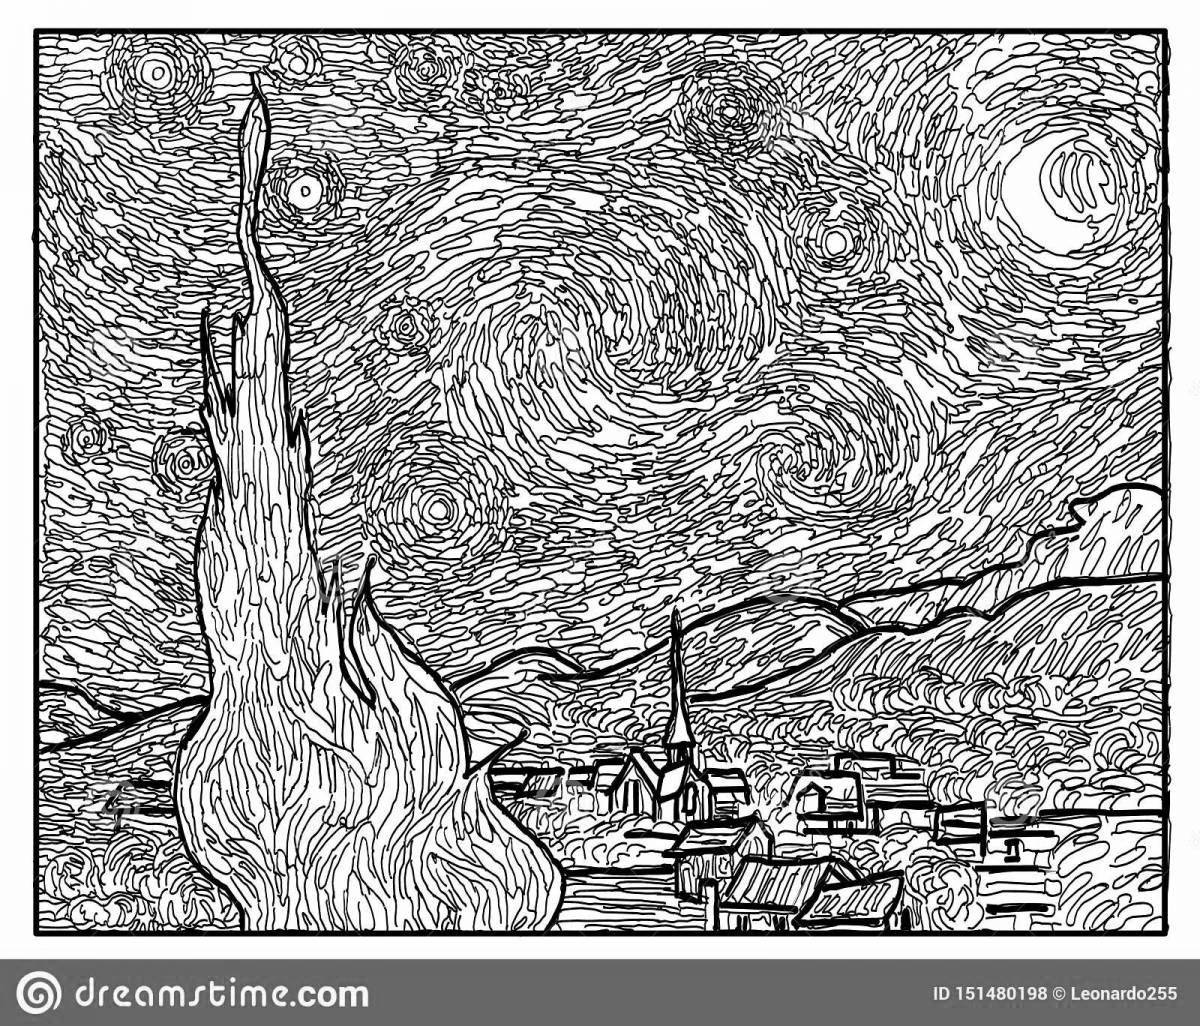 Captivating starry night van gogh coloring book